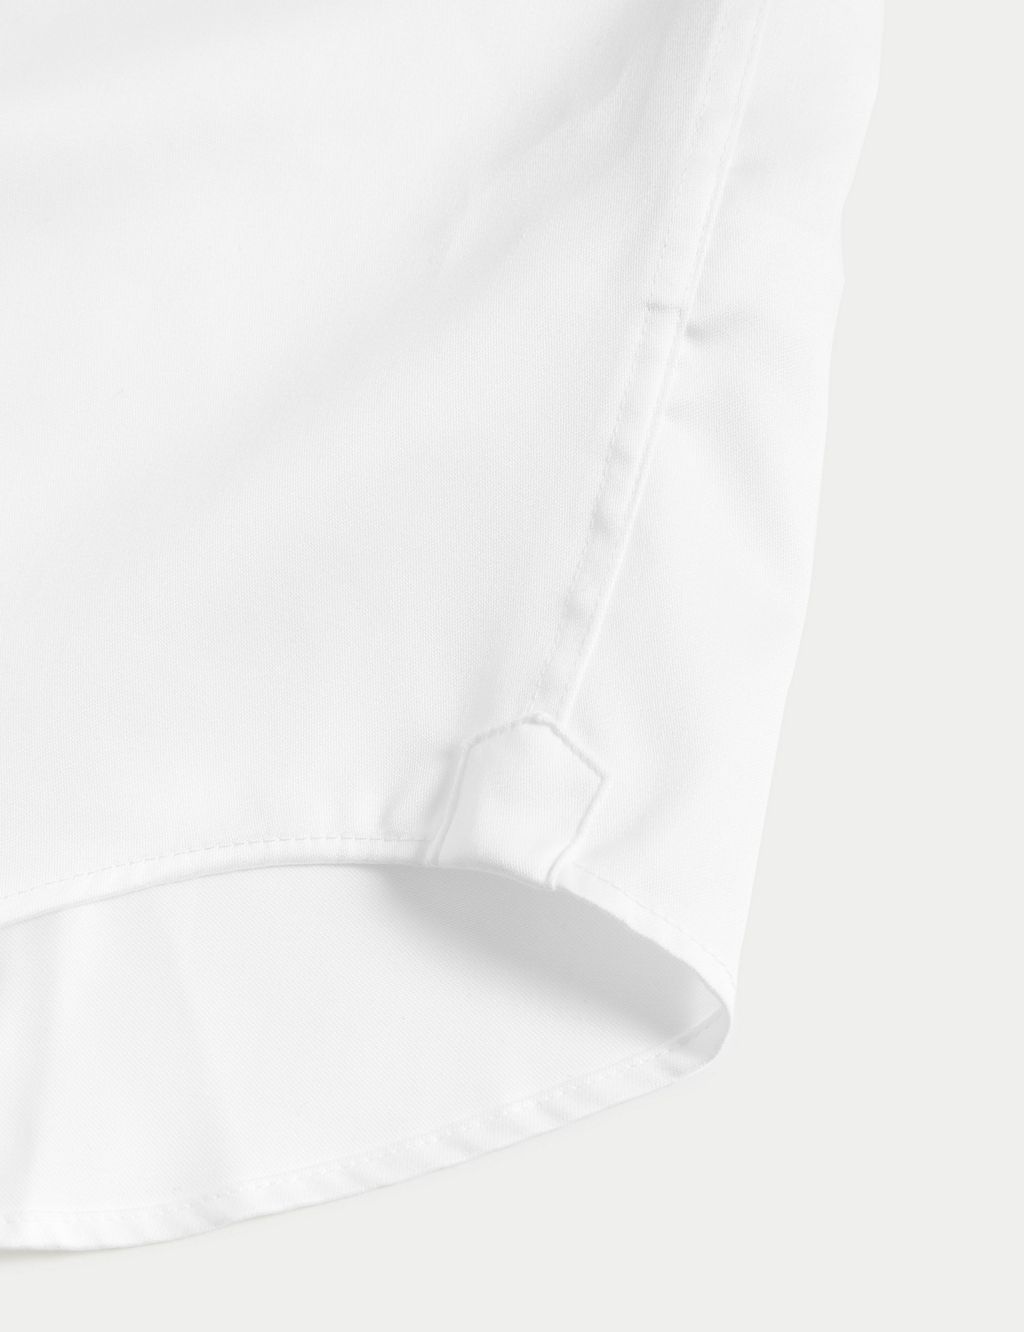 Tailored Fit Luxury Cotton Double Cuff Dress Shirt 2 of 8